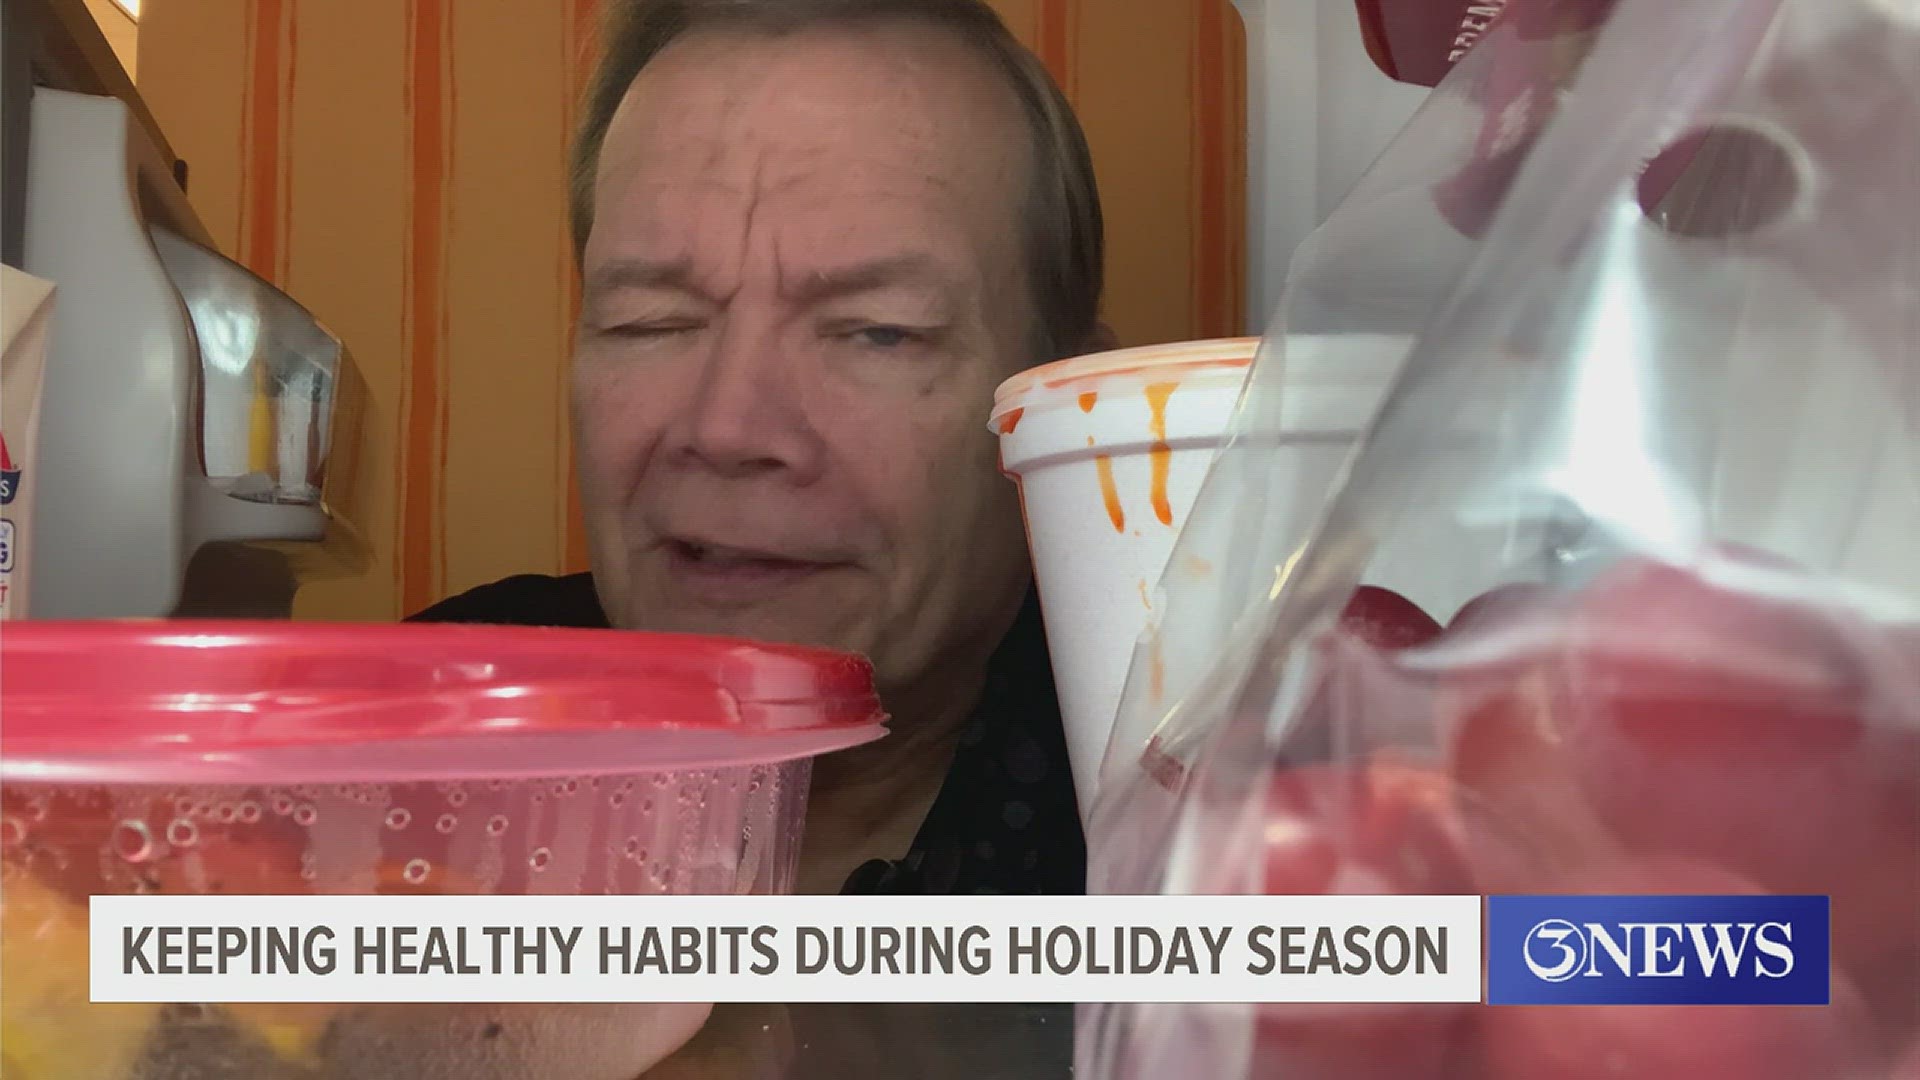 3NEWS' Brian Burns spoke with a local dietician who gave viewers tips on how to balance holiday festivities and treats with healthy habits.